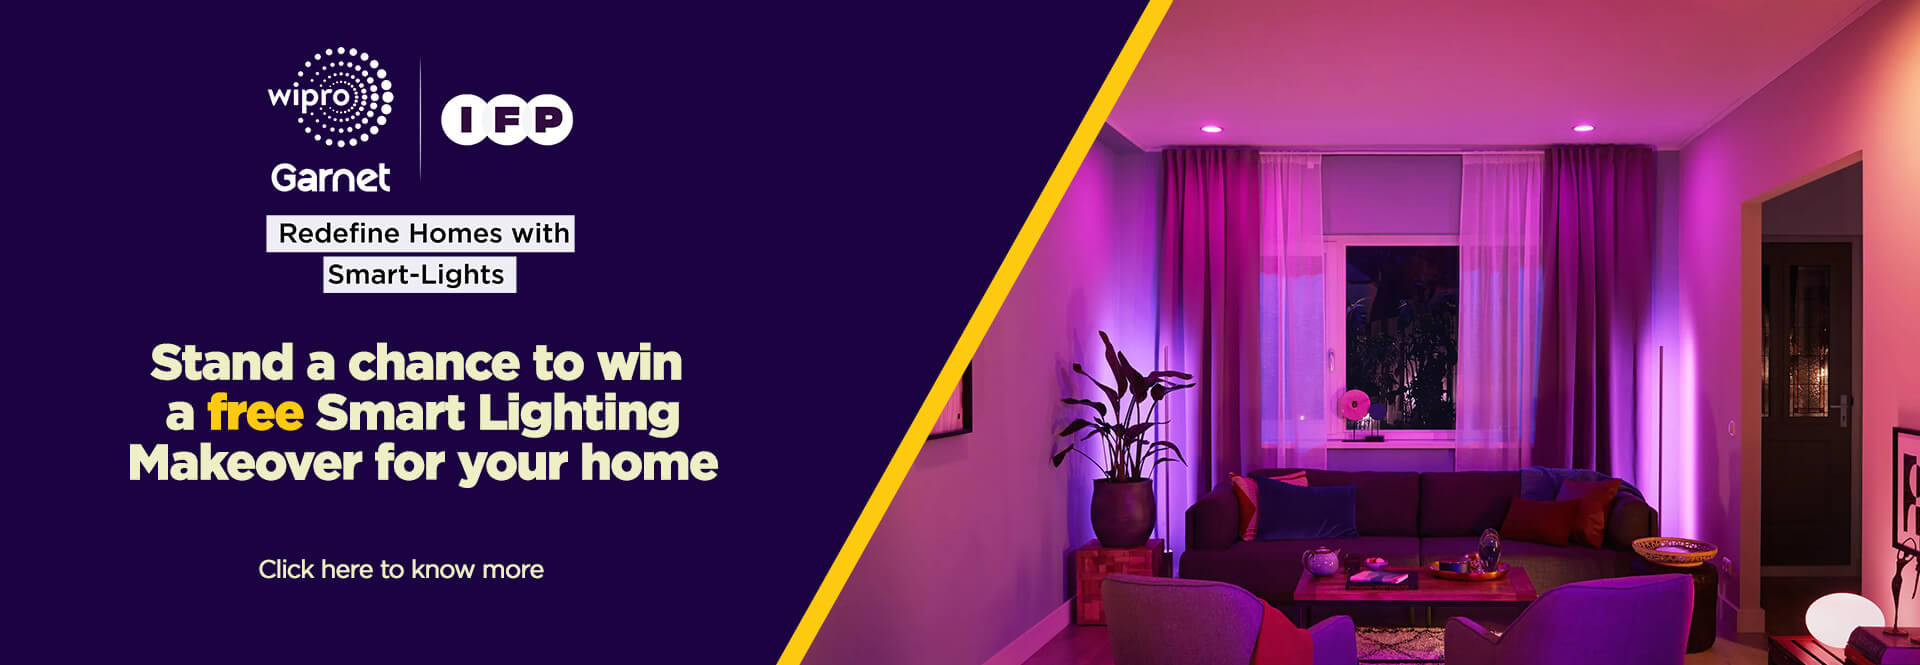 Stand a change to win a free lighting makeover for your home